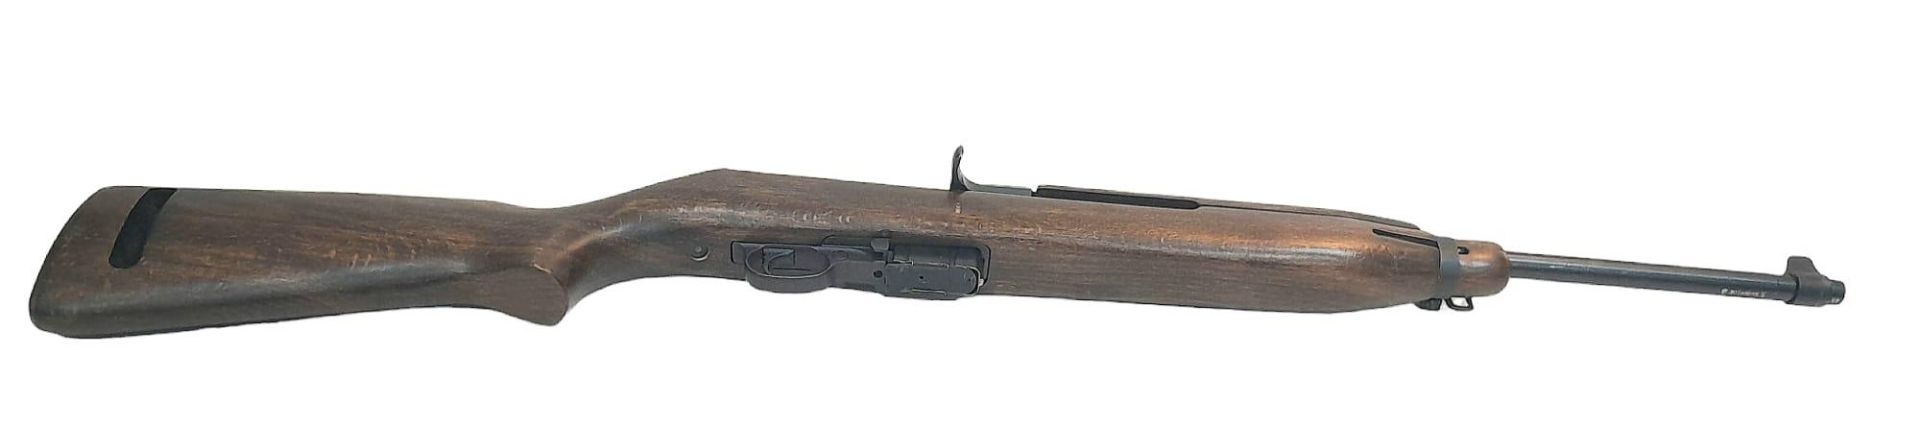 A Deactivated Winchester M1 Carbine Self Loading Rifle. Used by the USA in warfare from 1942-73 this - Bild 5 aus 12